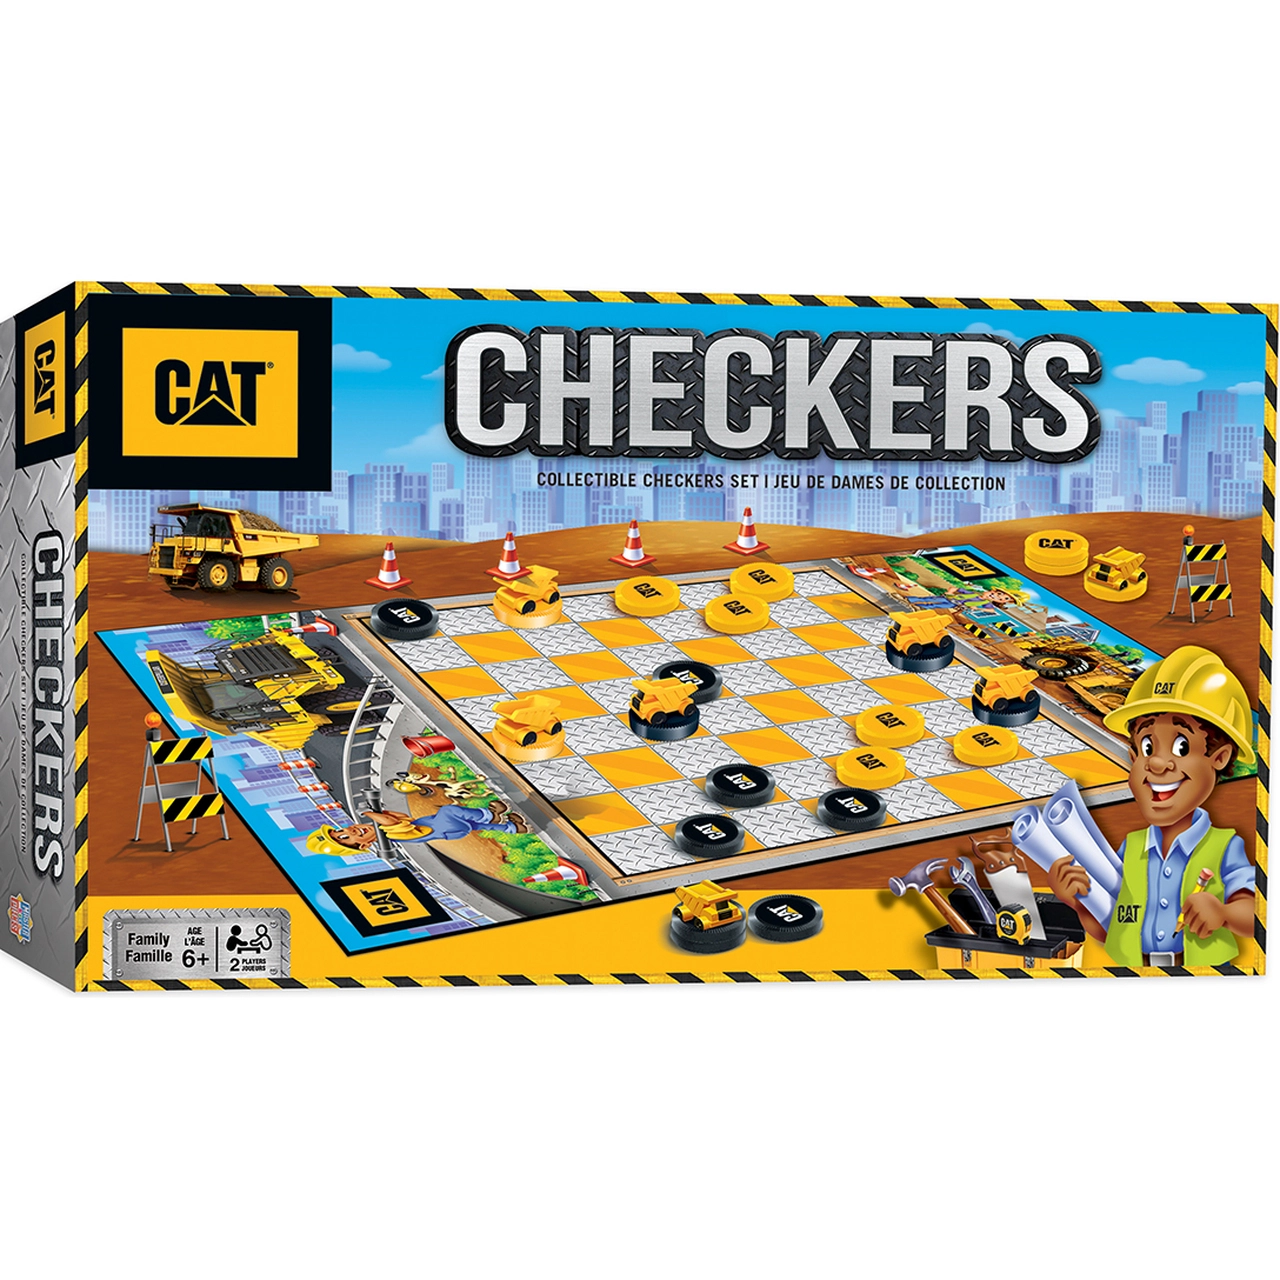 MasterPieces-Caterpillar Checkers Board Game-41902-Legacy Toys